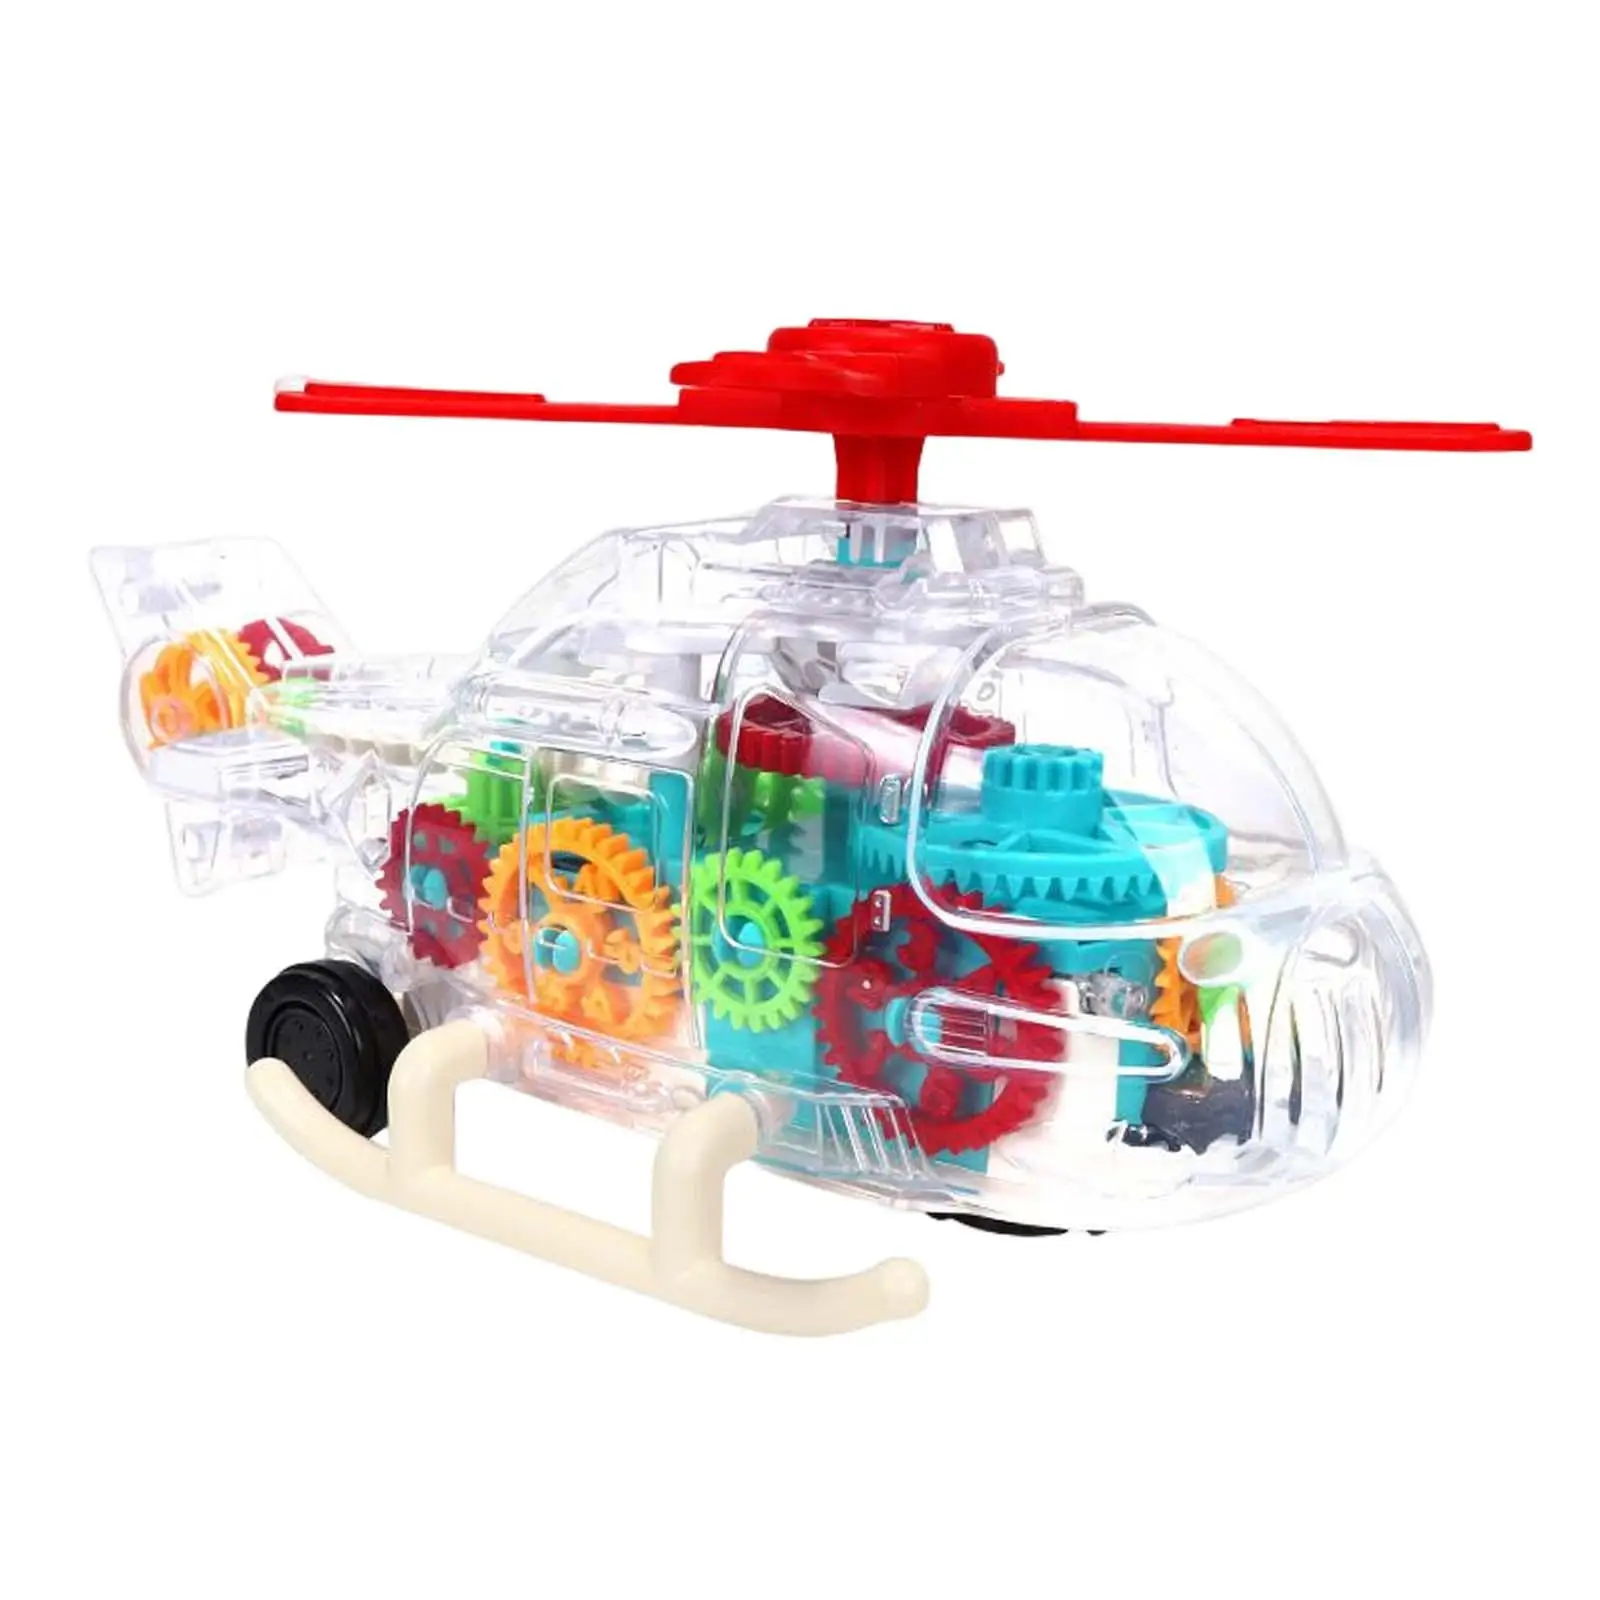 Mechanical Gear Helicopter Toy with Lights with Moving Gears Interactive Toys for Children Kids Toddlers Girls Birthday Gifts